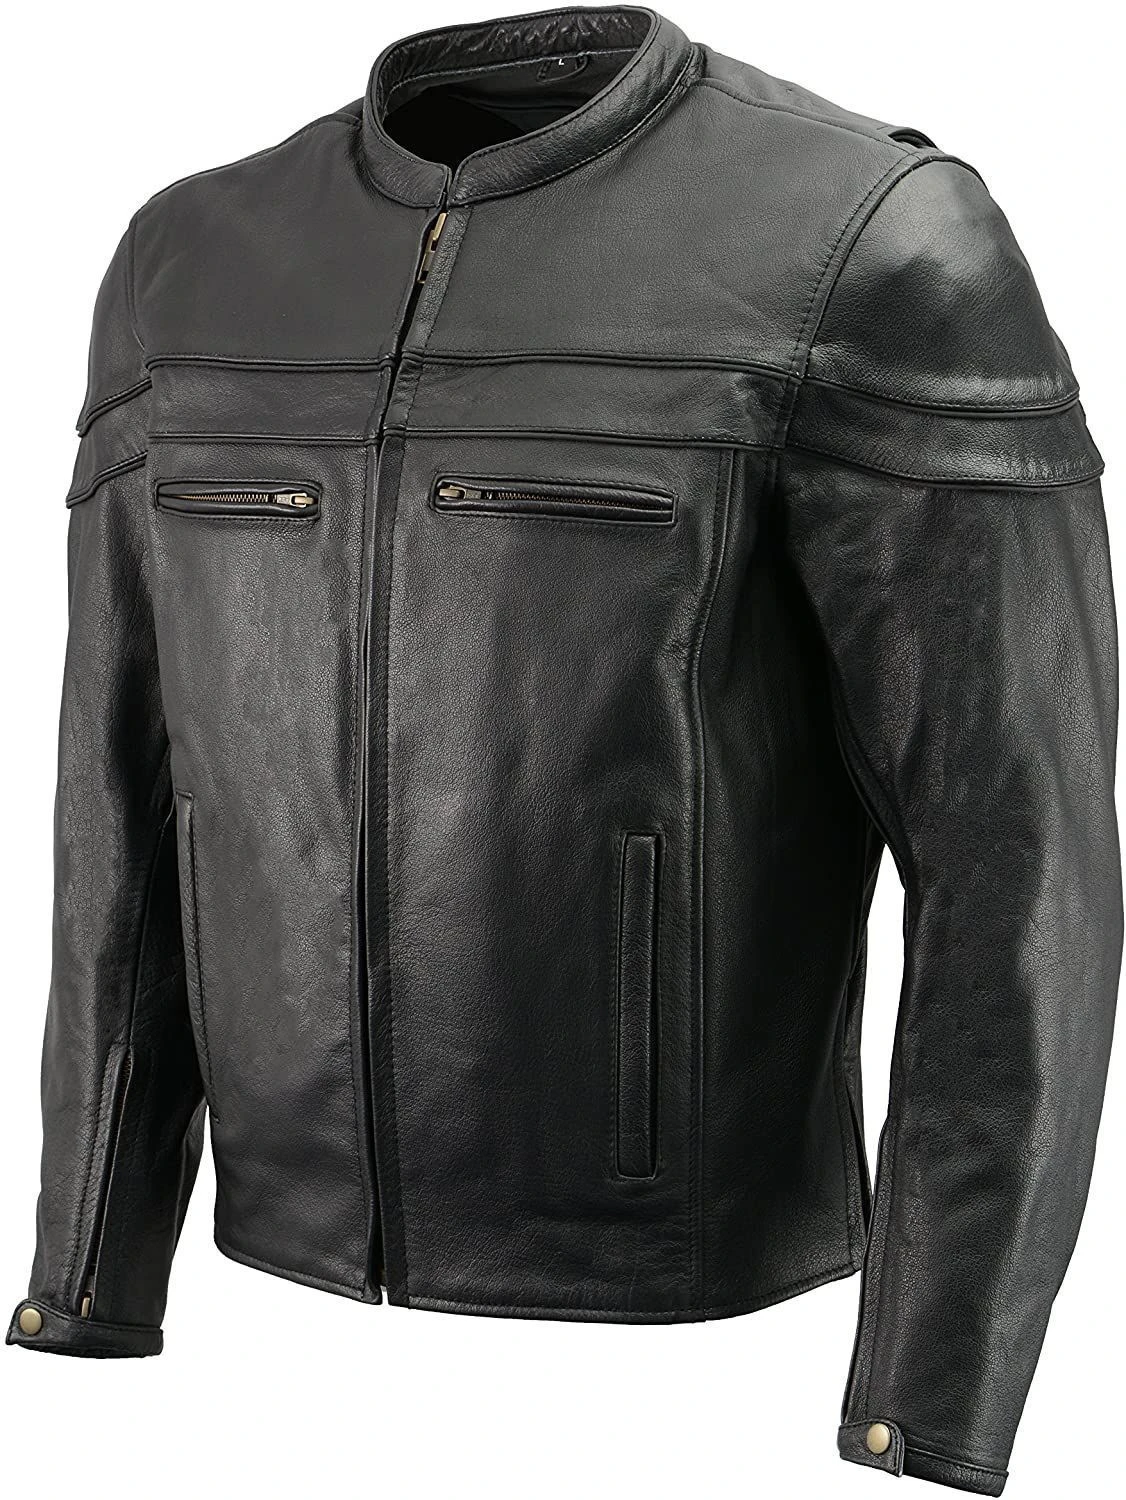 Buy Leather Jacket from Manager, Pakistan | Tradewheel.com